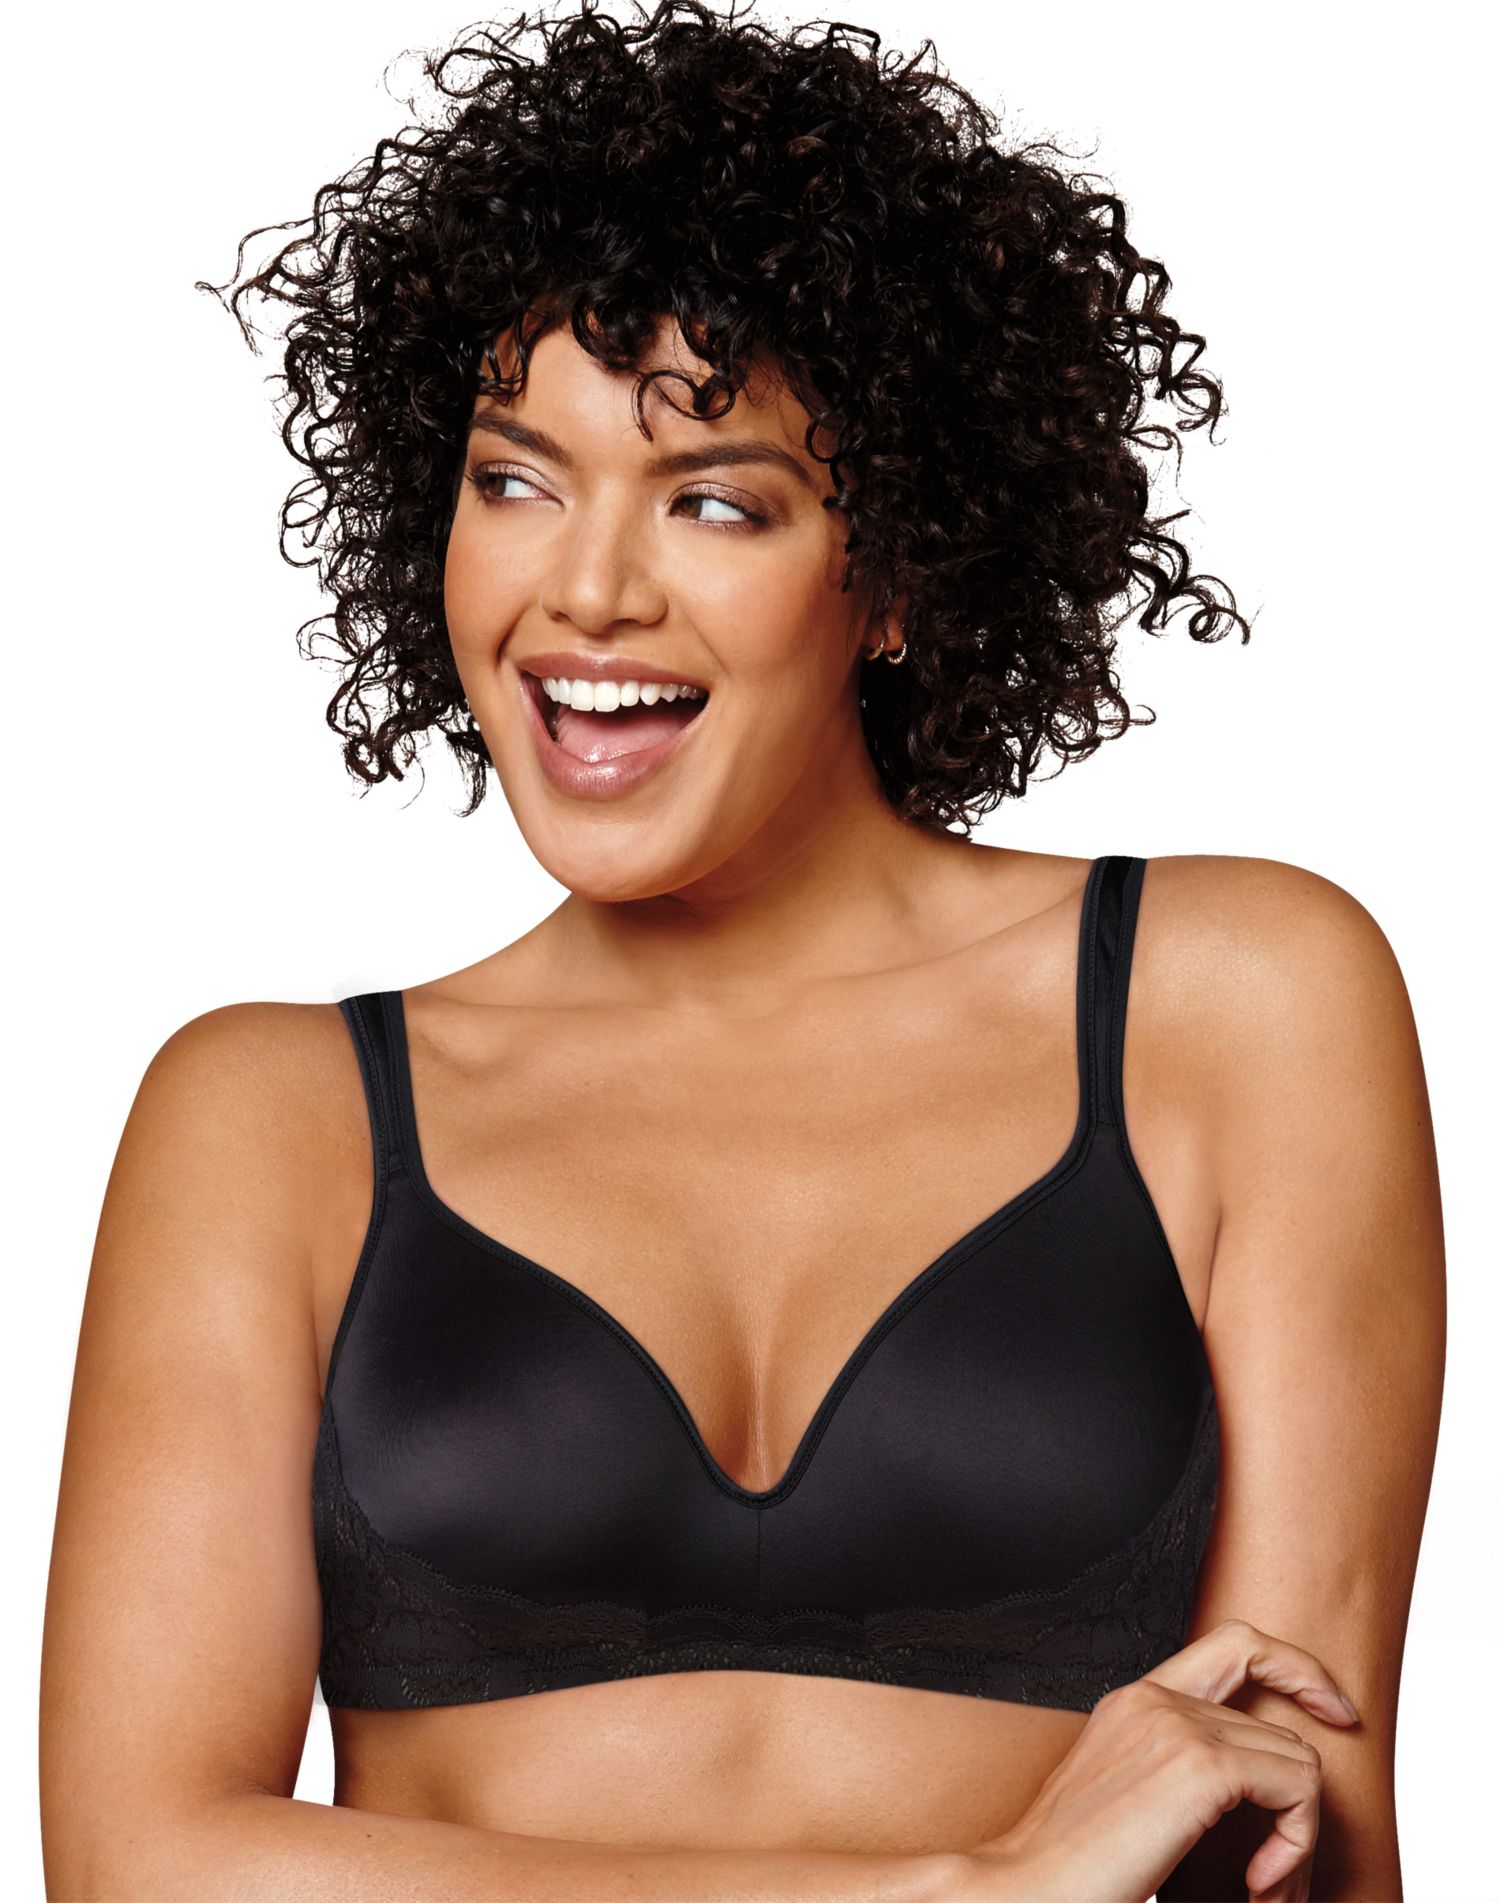 JMS Shaping Comfort Lace Wirefree Bra